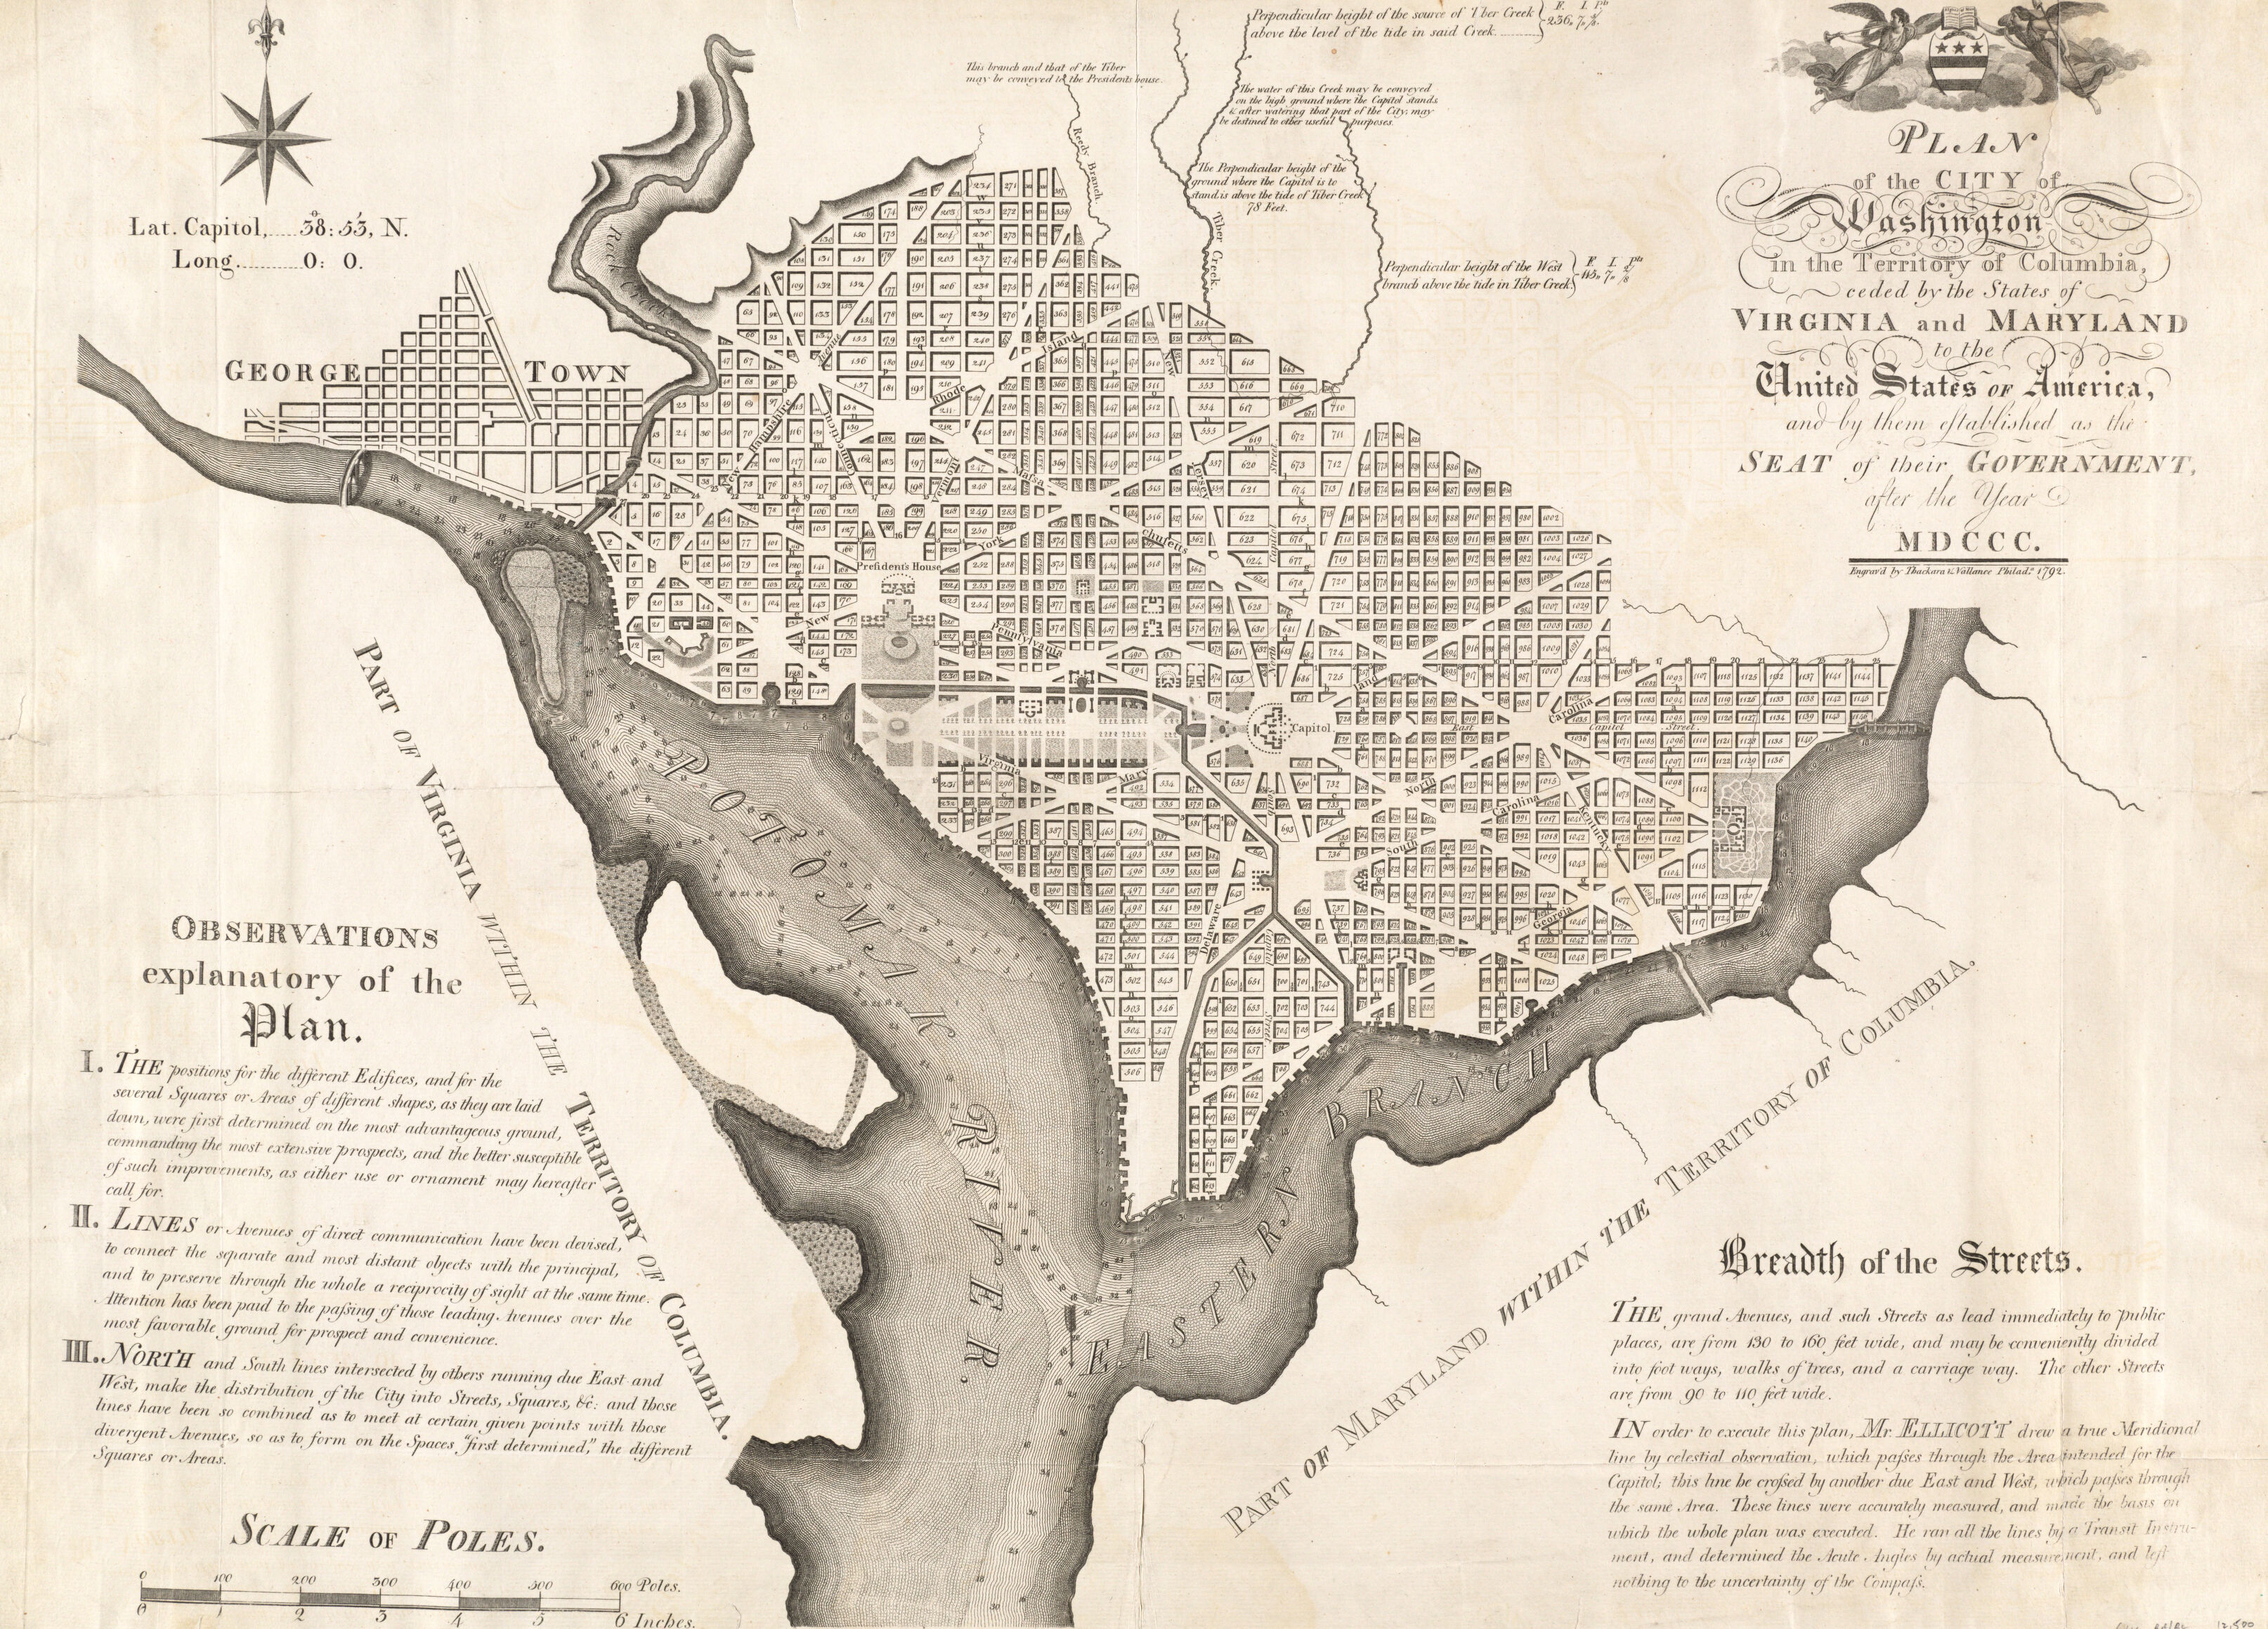 a black and white engraved image of a city plan--Washington, DC--on the east bank of a river